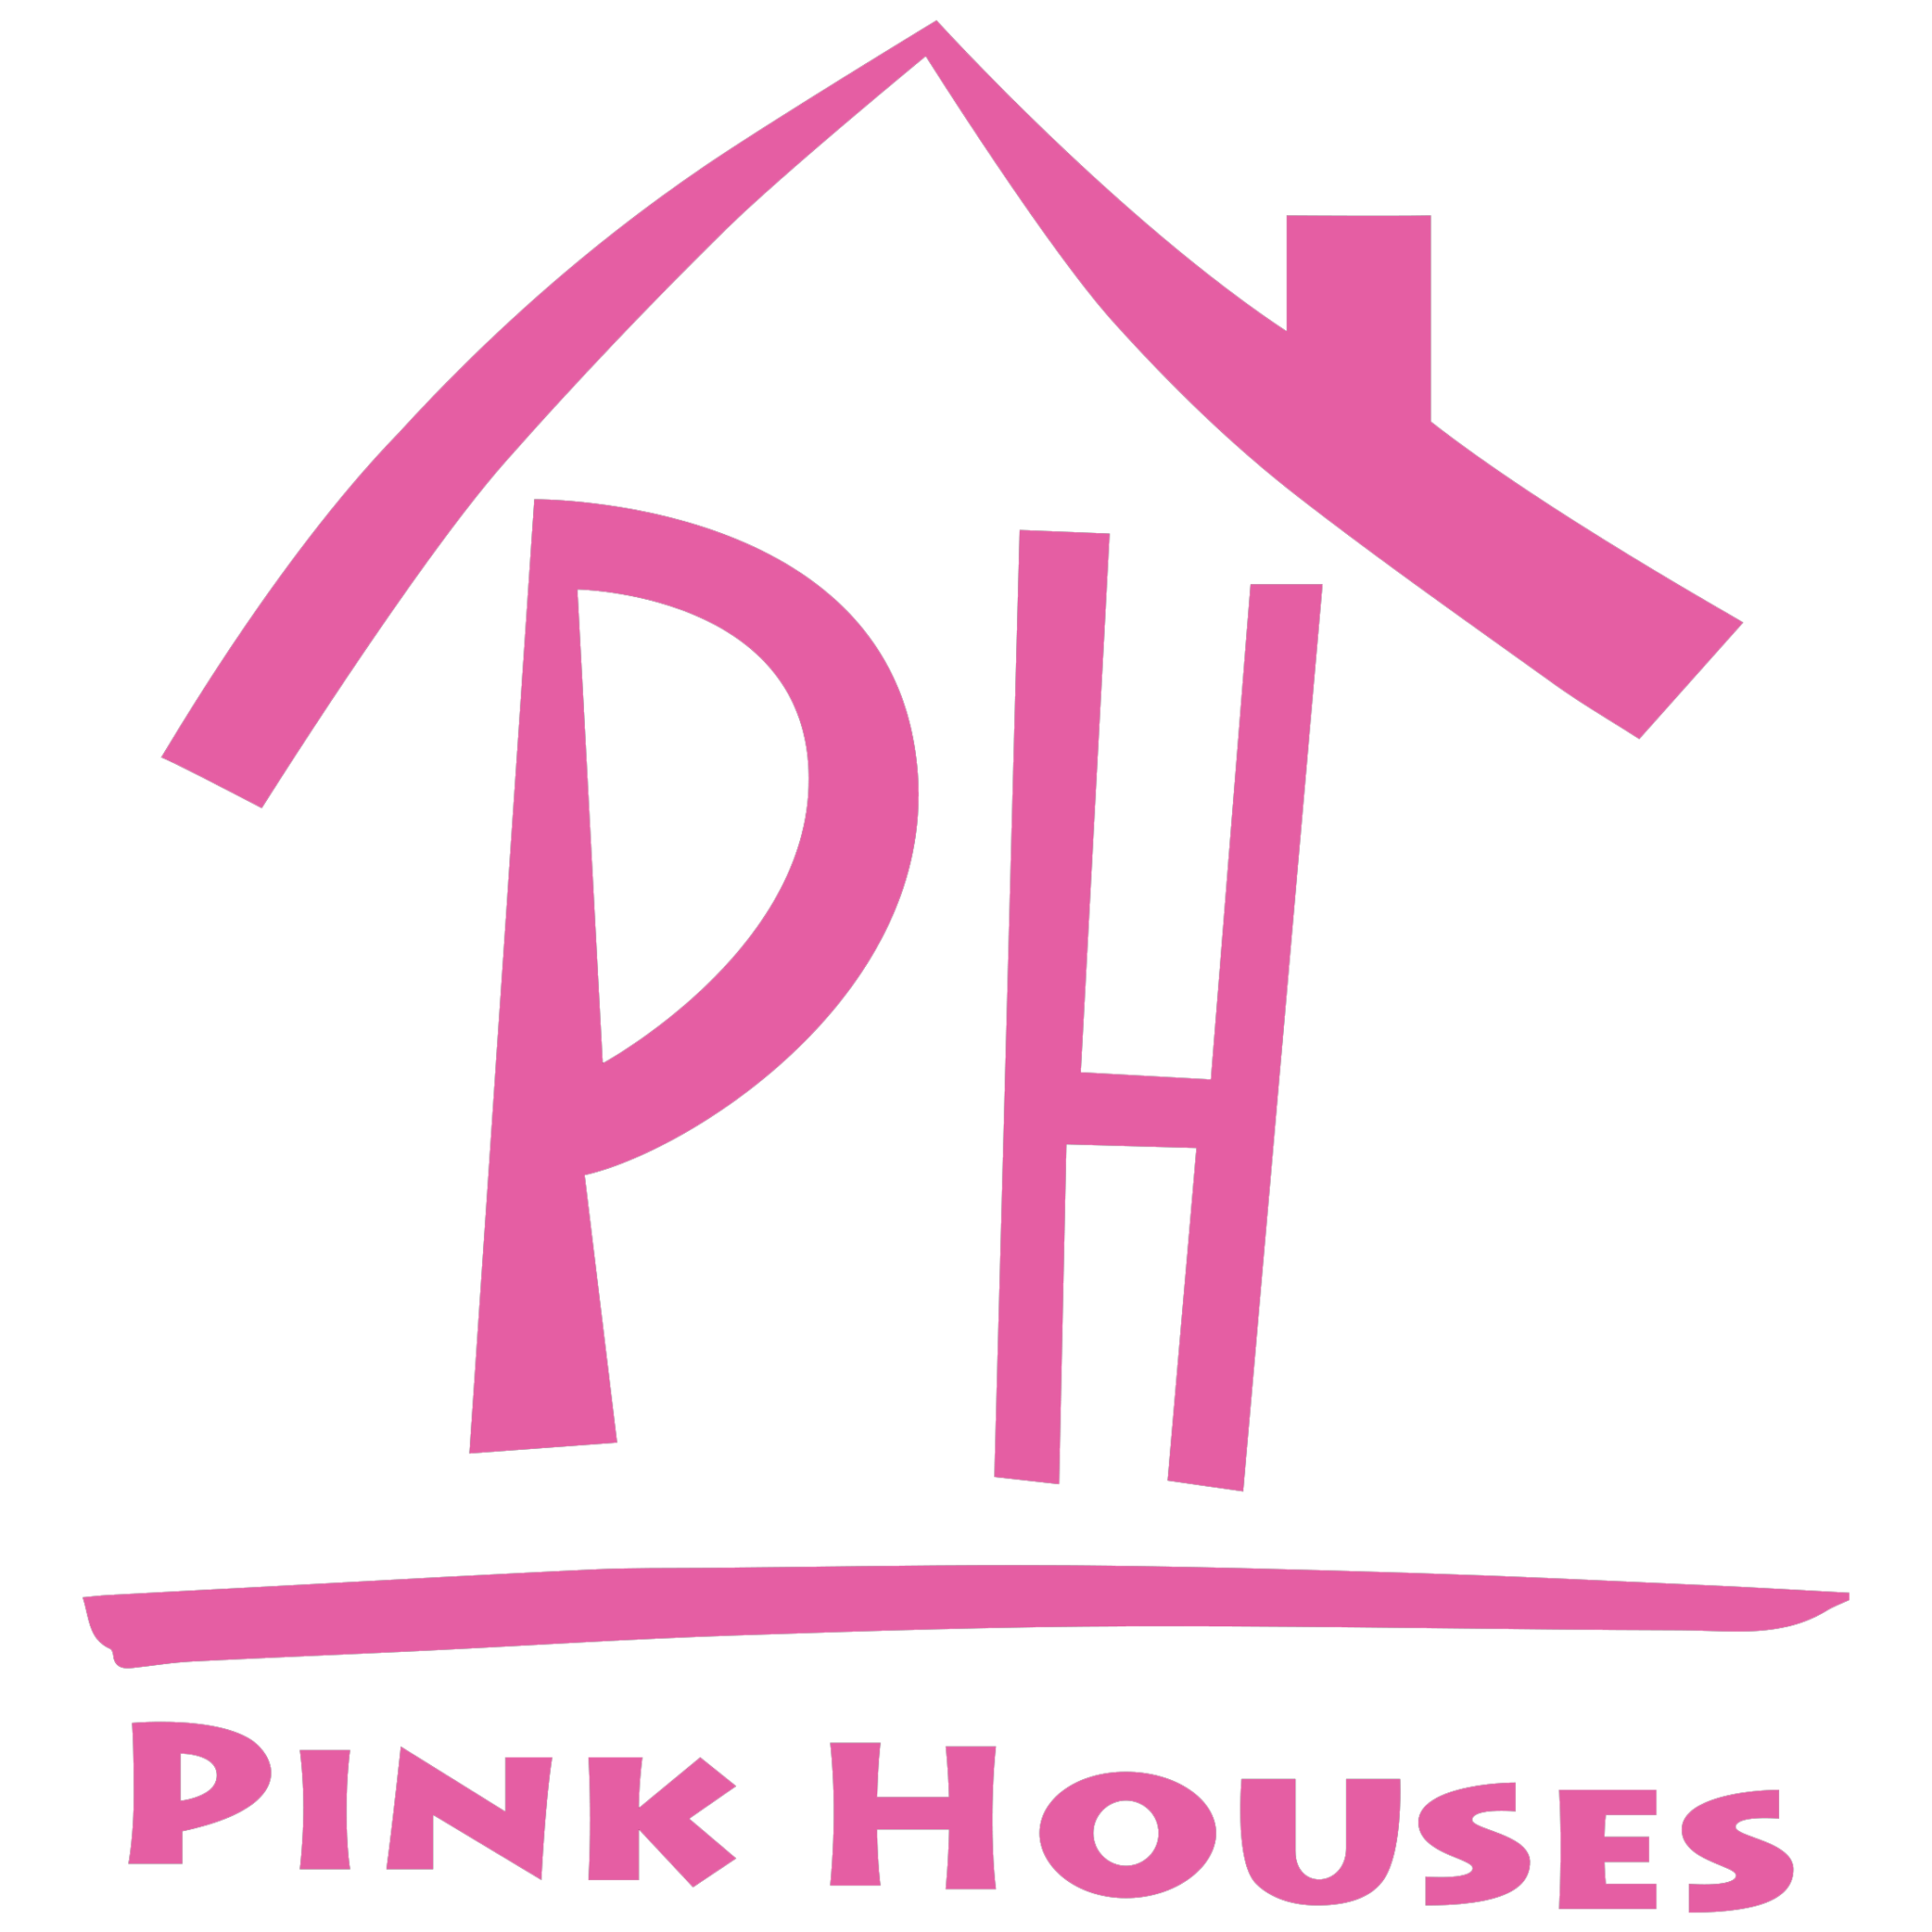 Pink Houses